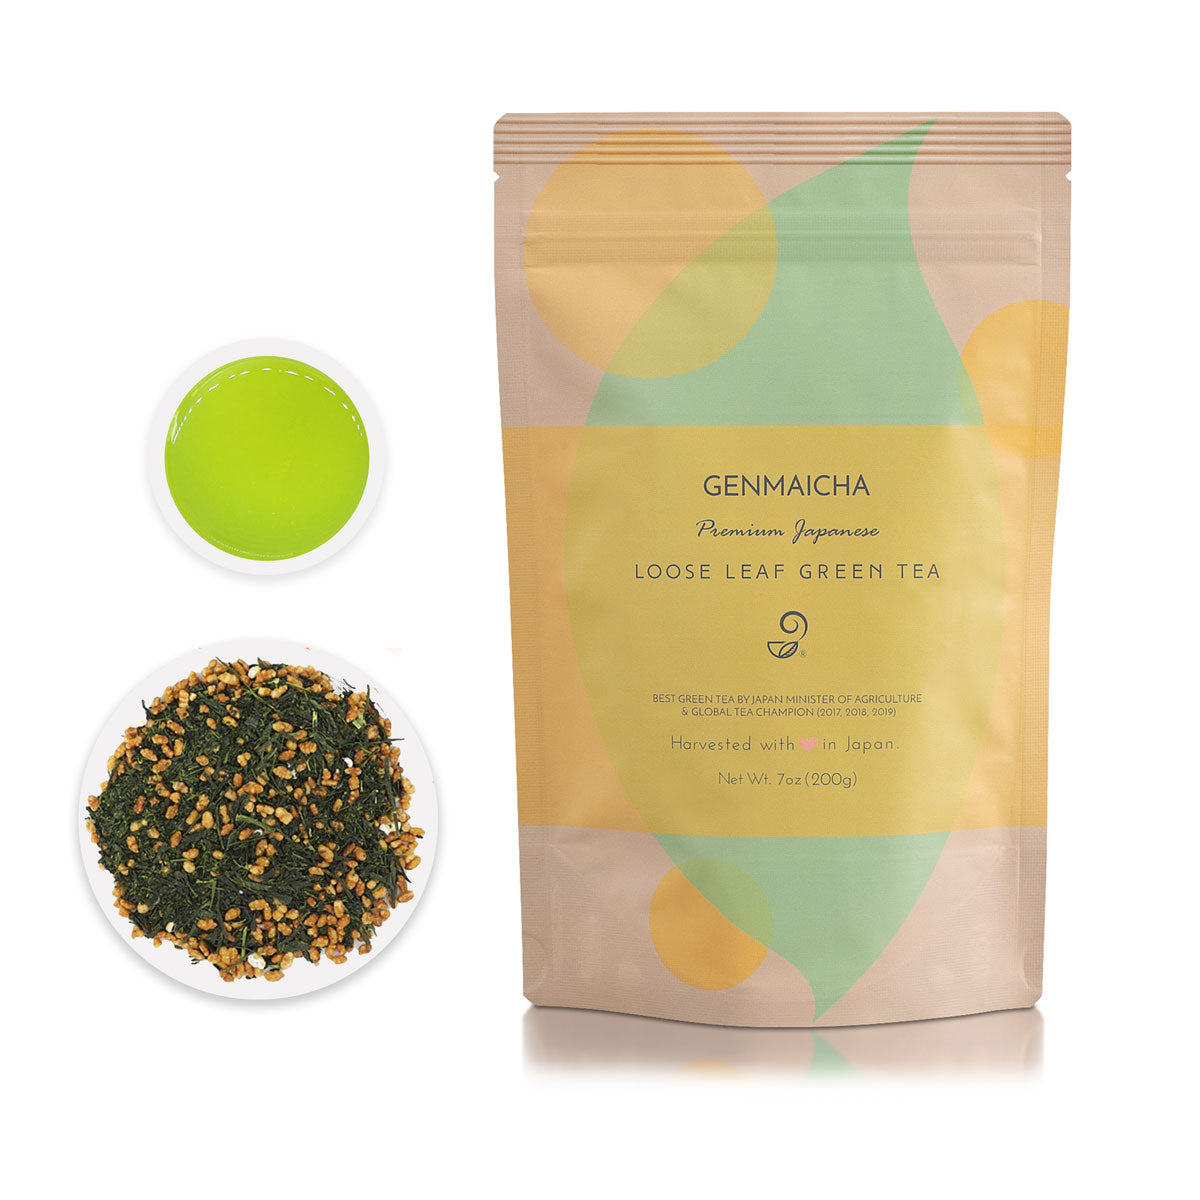 Genmaicha - Japanese green tea with roasted rice - package